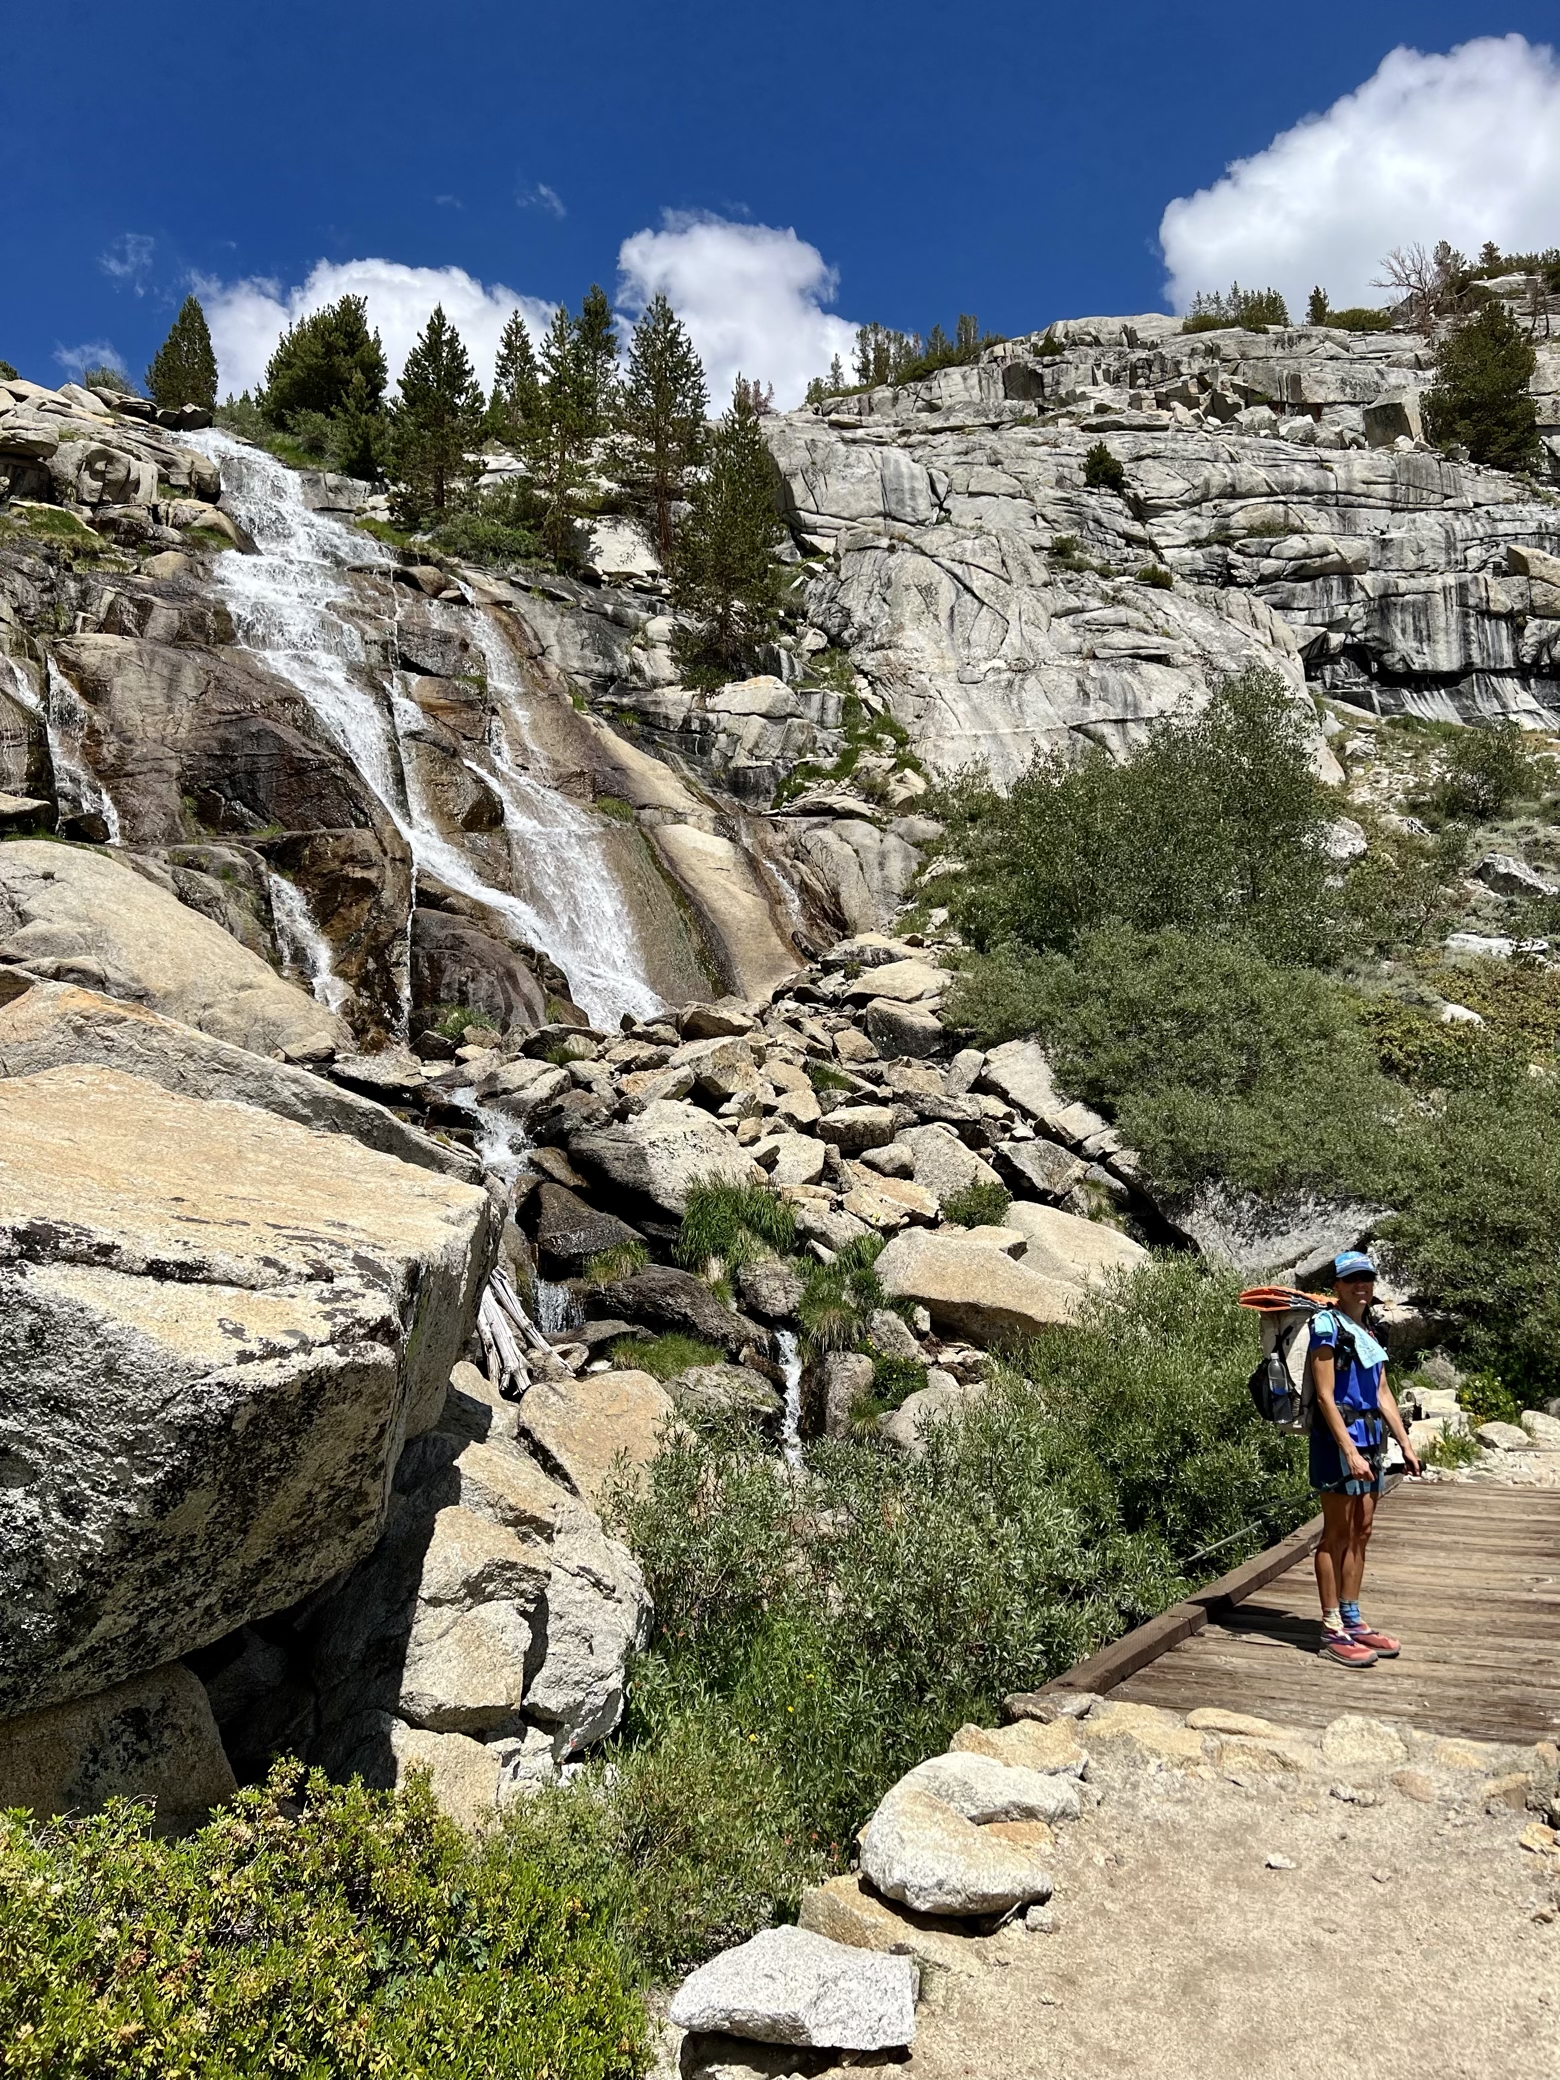 Ace beside a waterfall on the descent back to the JMT